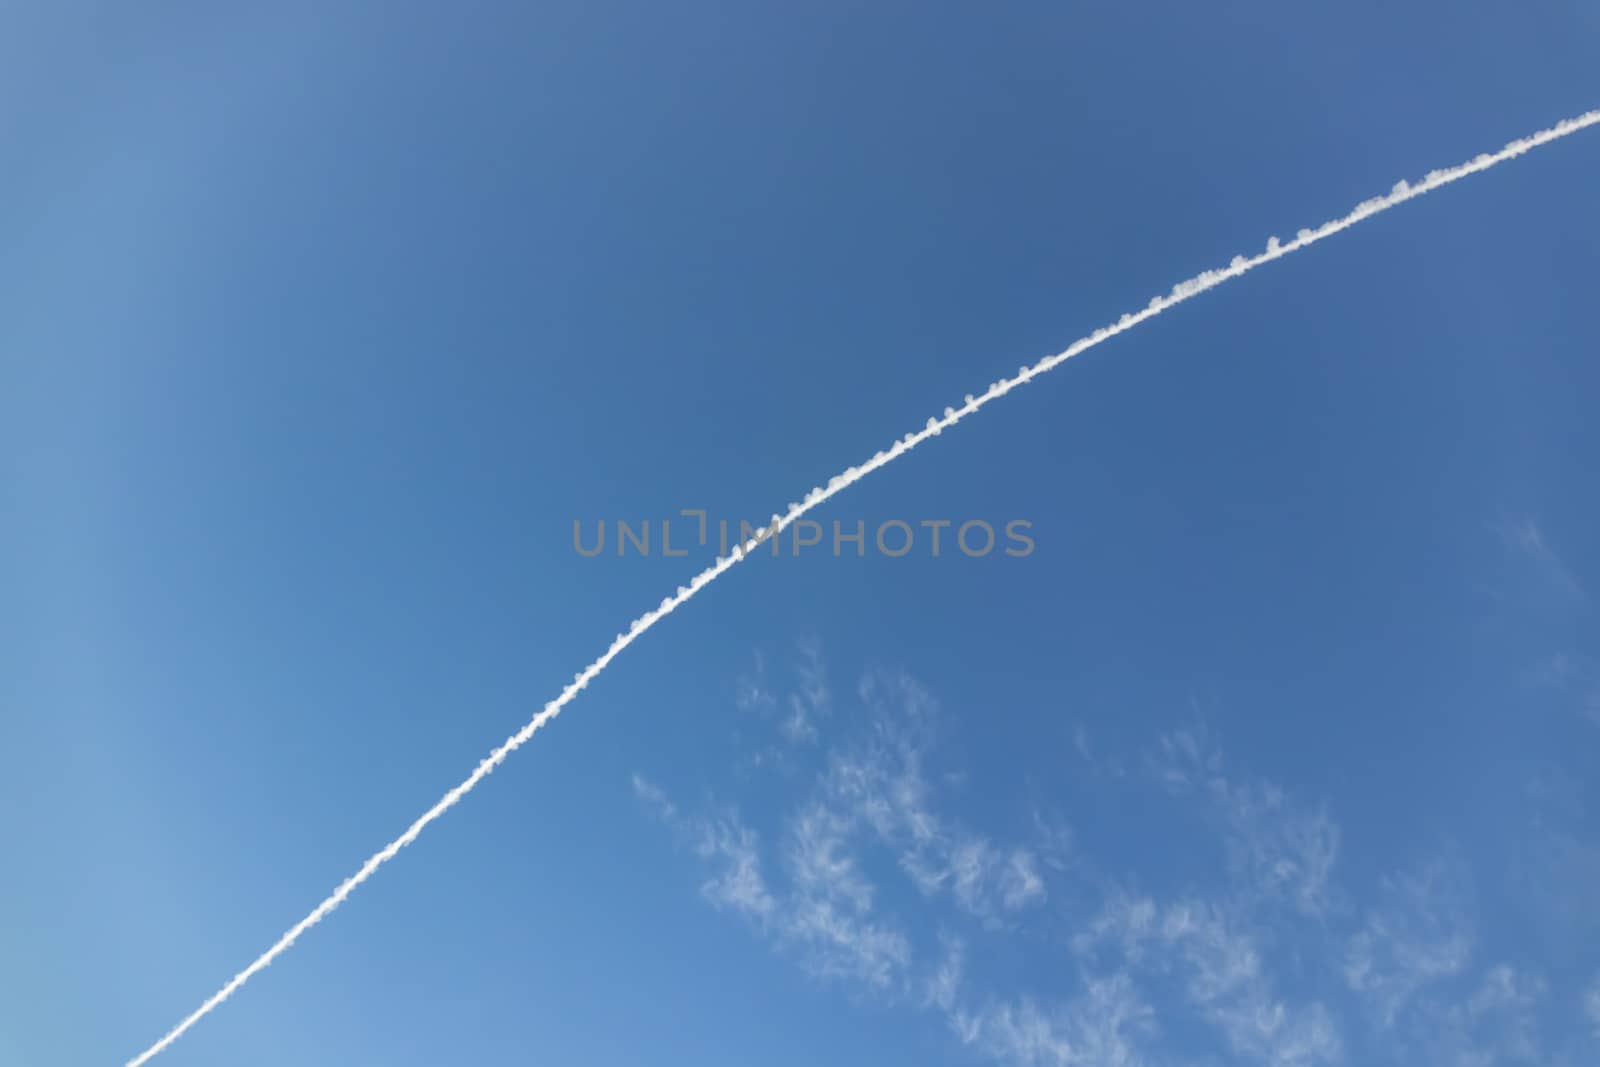 jet fuel trail left by planes at the sky